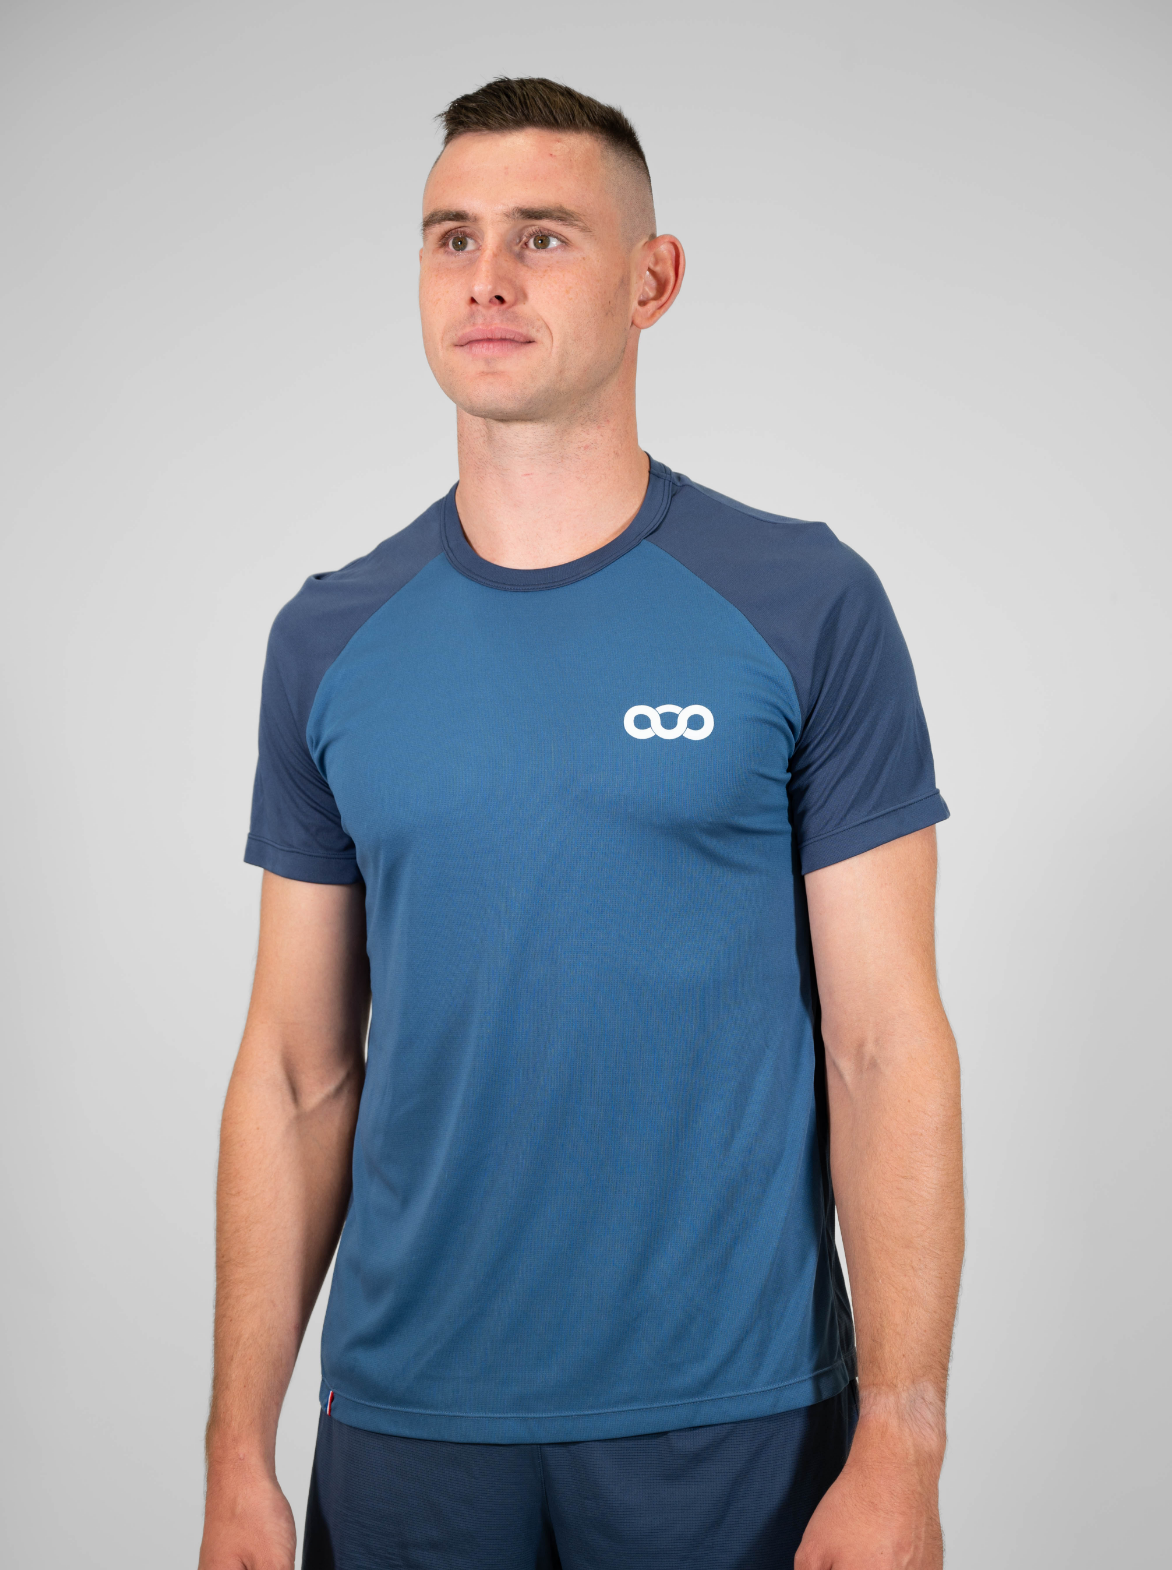 T-Shirt Running Homme Made in France et Recyclé - TOULON - Ventes privées